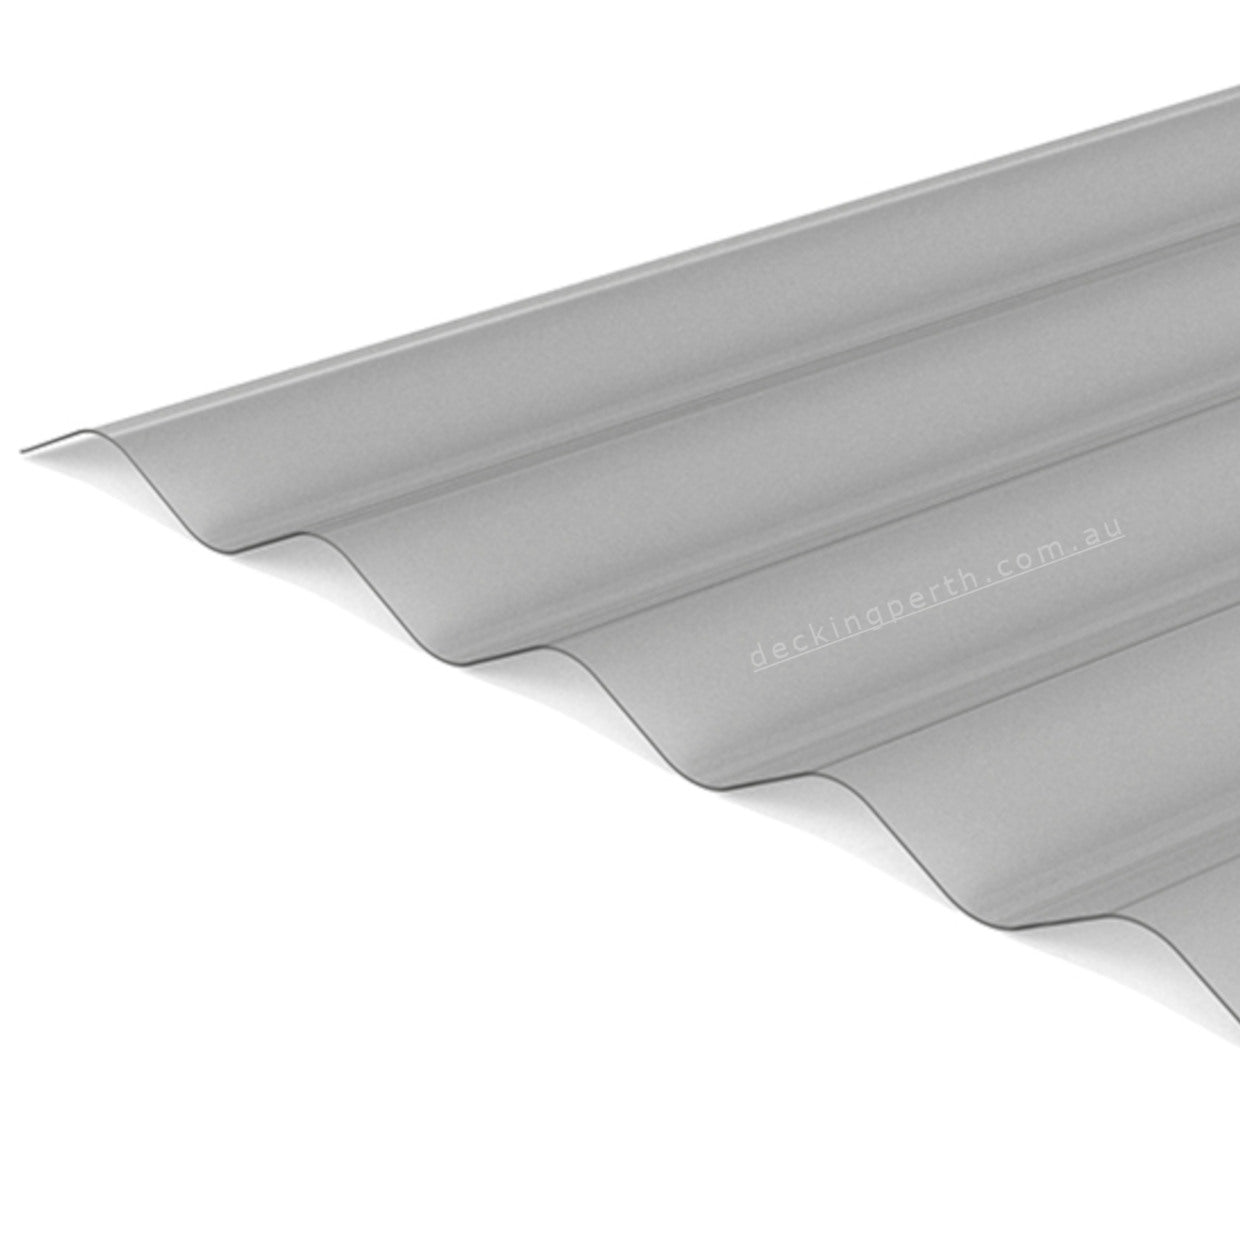 SUNSKY_3001_Corrugated_polycarbonate_sheeting_Diffused_Grey_Decking_Perth